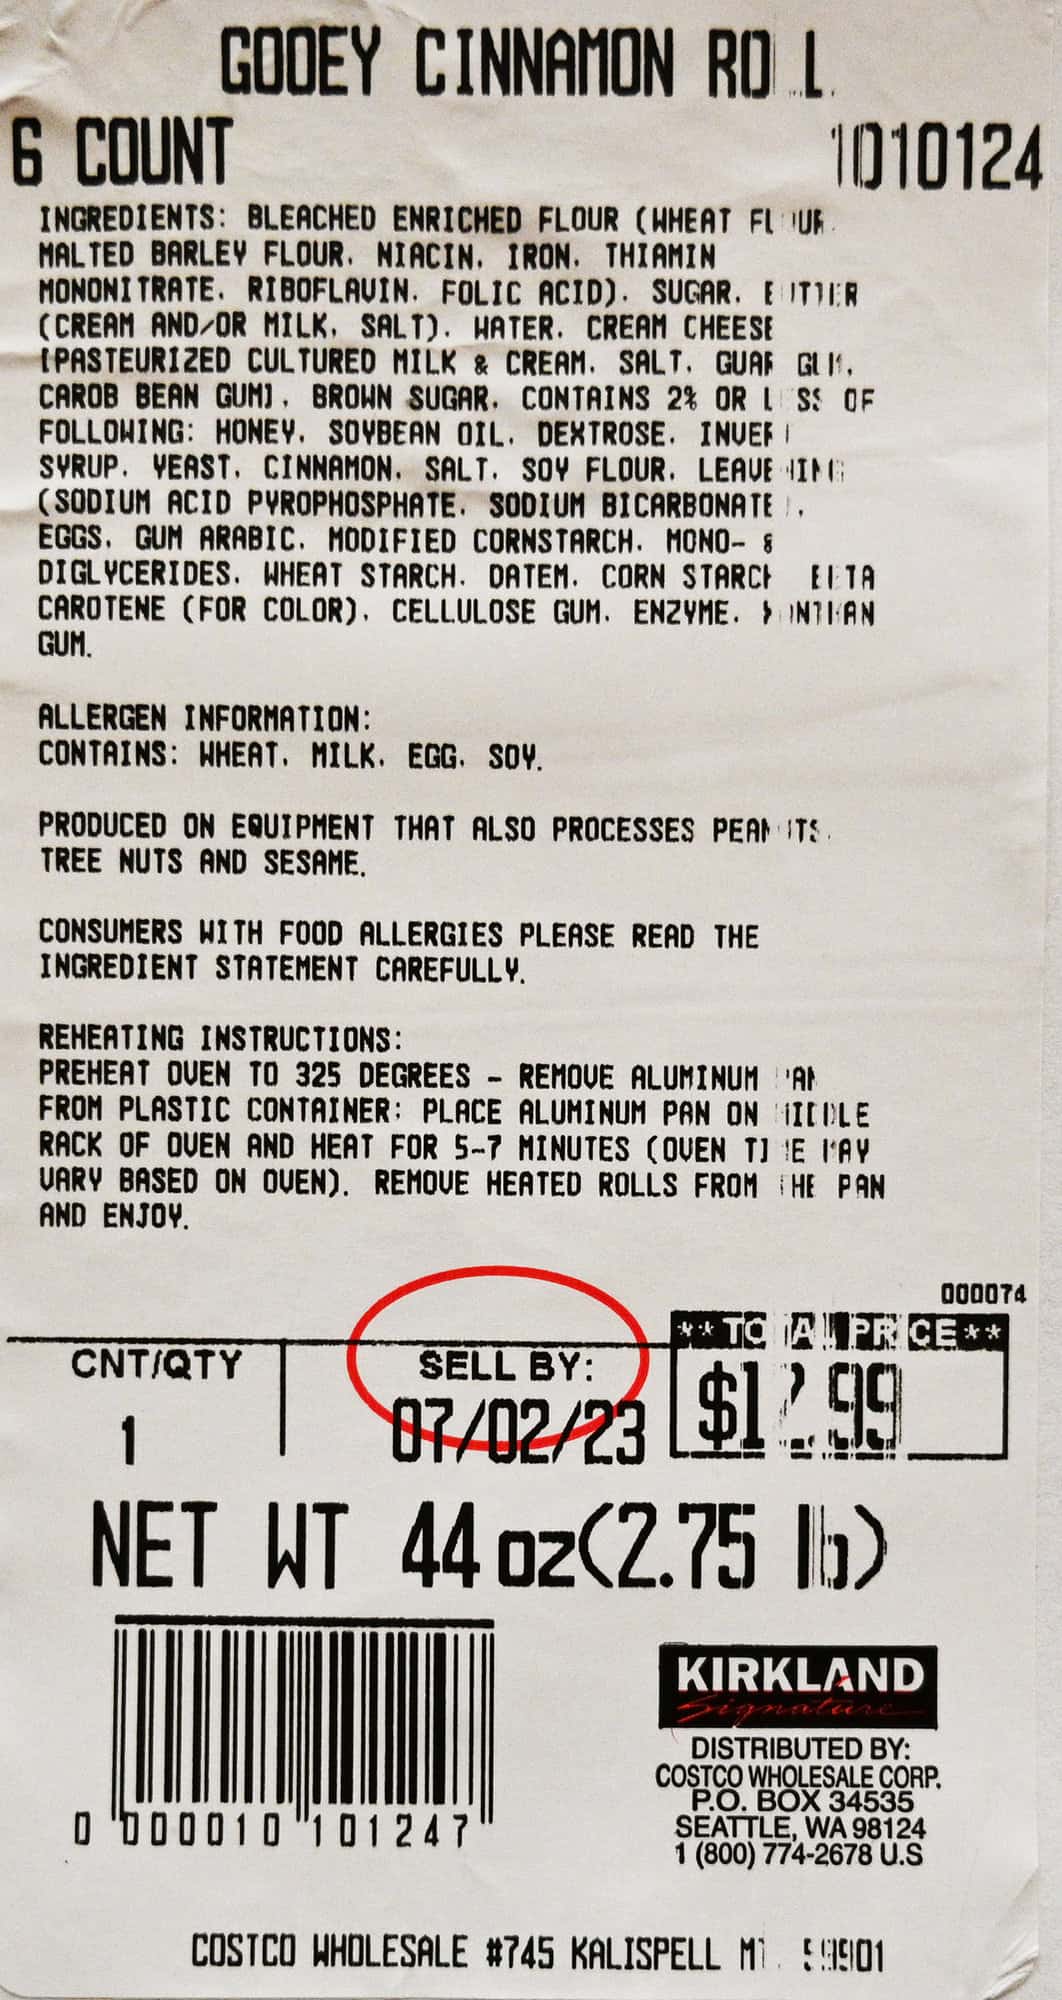 Closeup image of the front label on the cinnamol rolls showing ingredients, allergens and heating instructions along with product number.